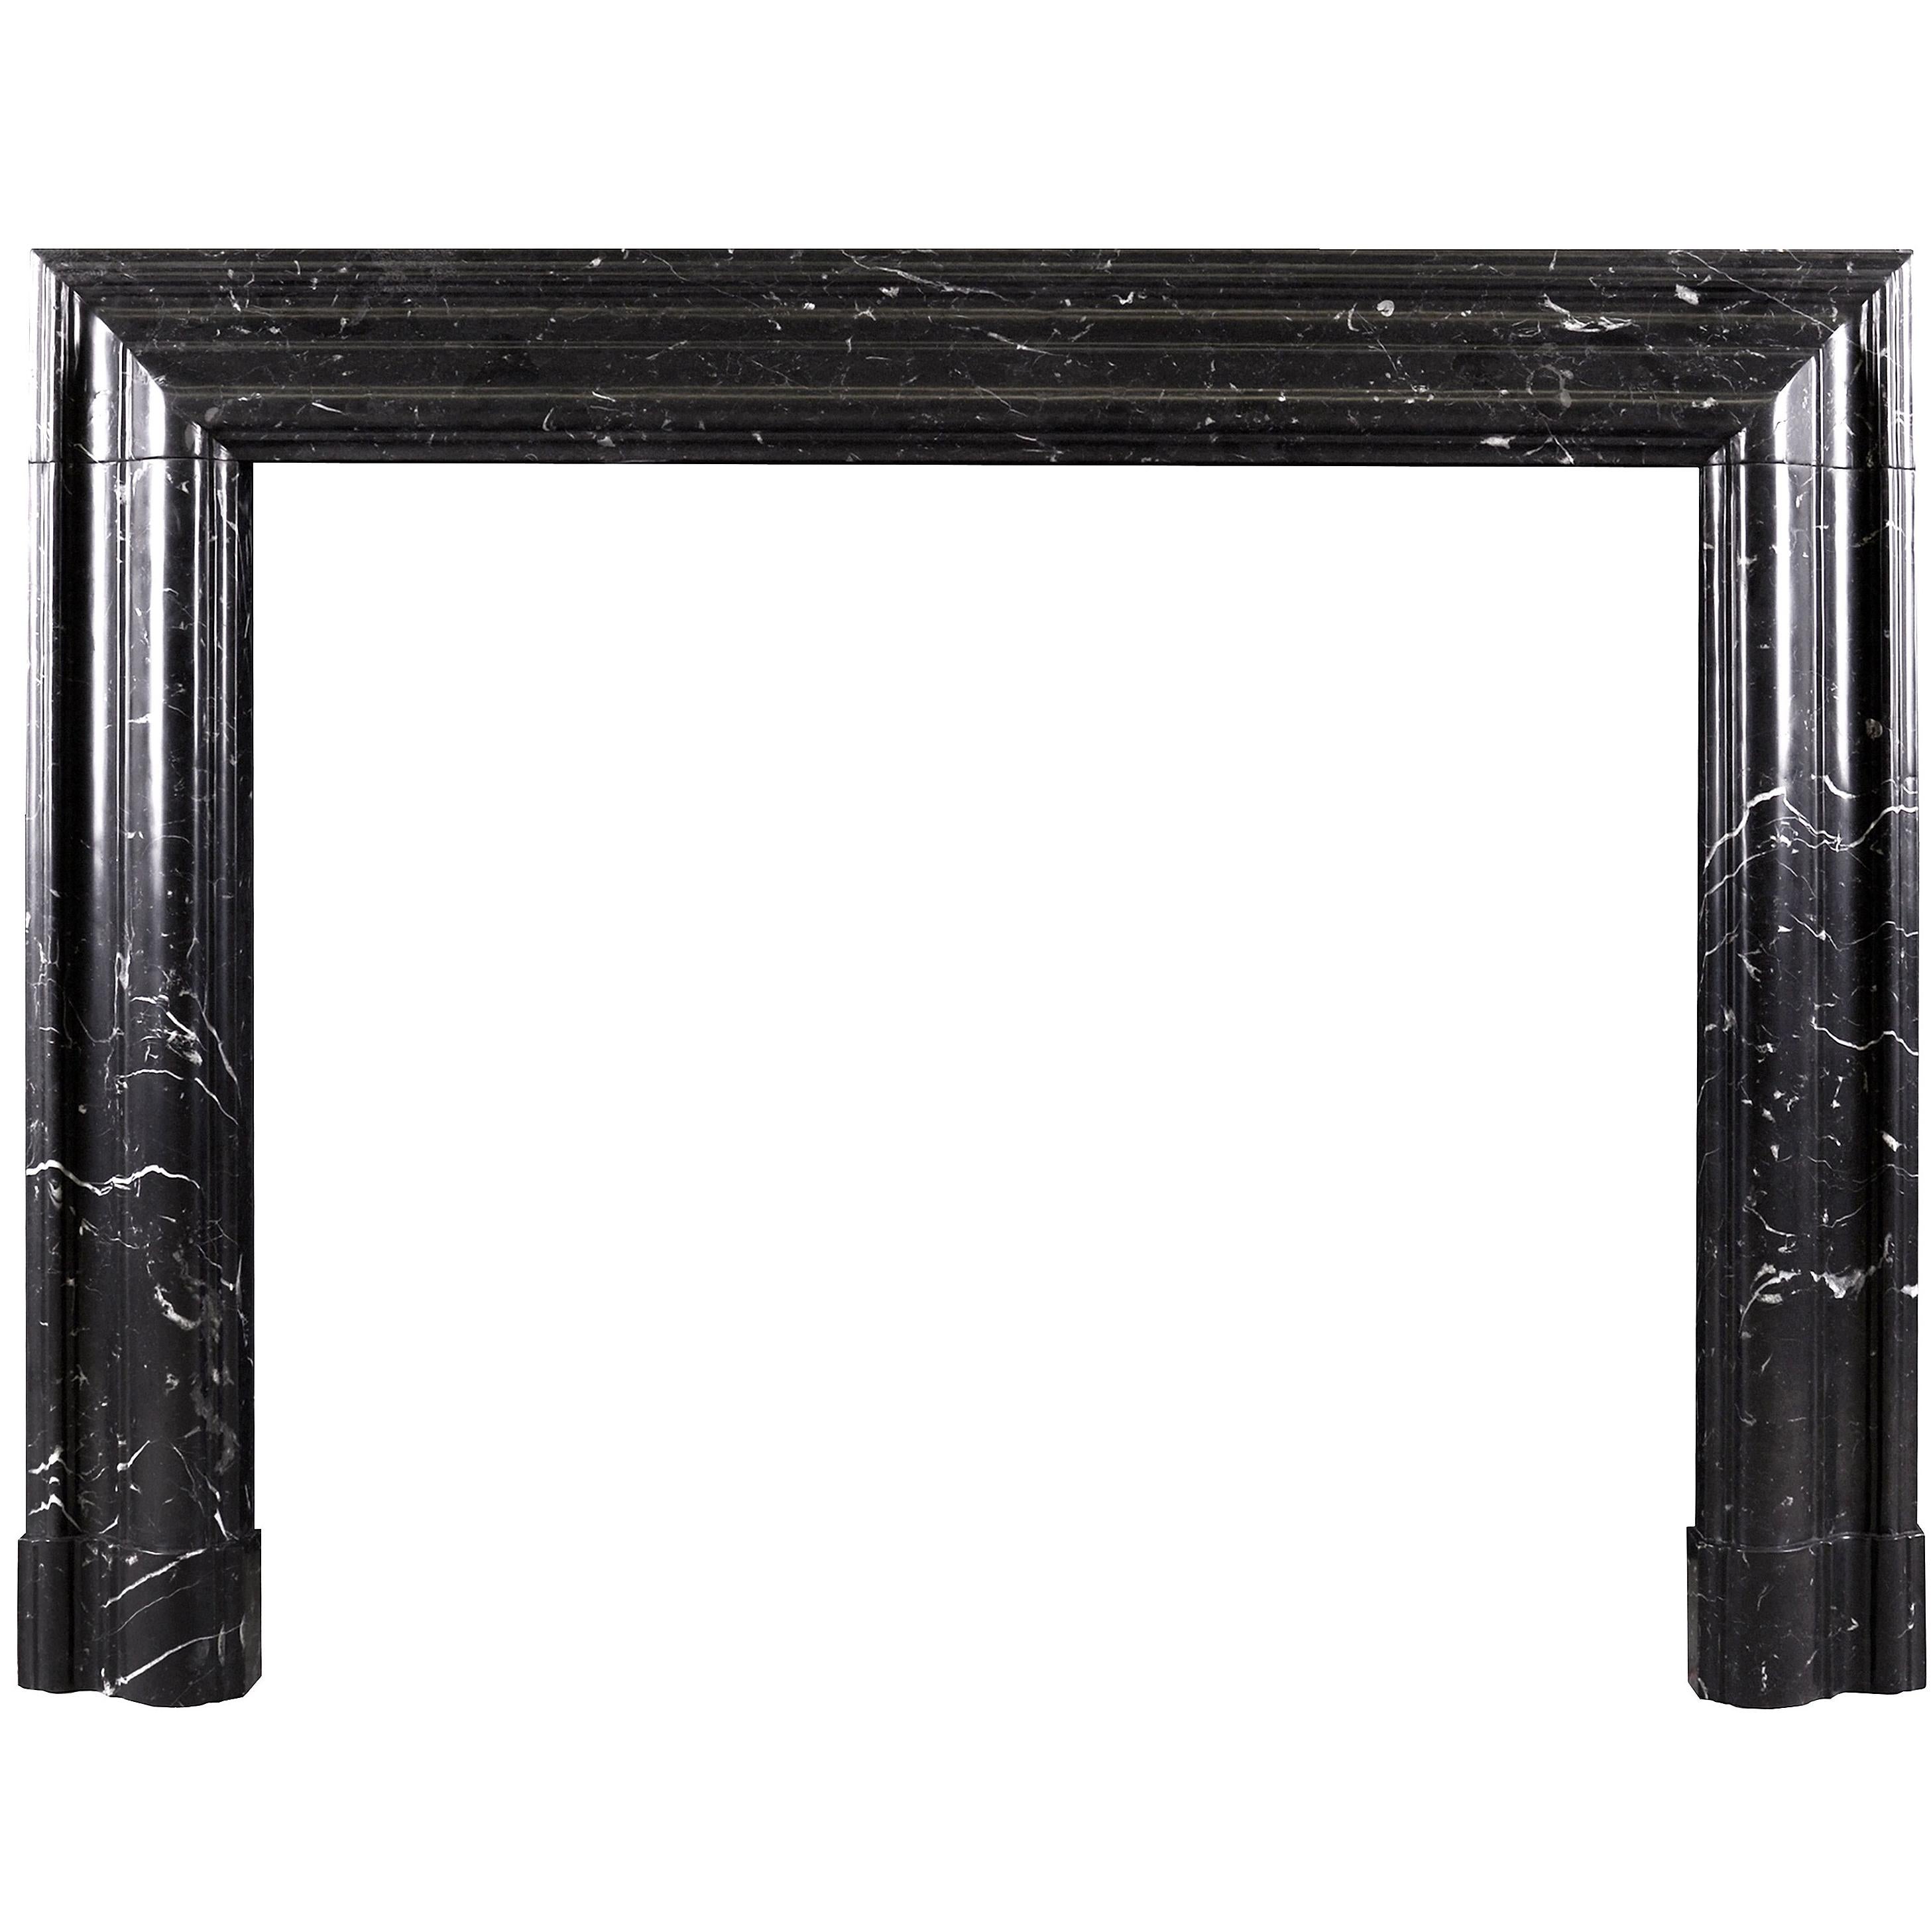 Bolection Fireplace in Nero Marquina Marble